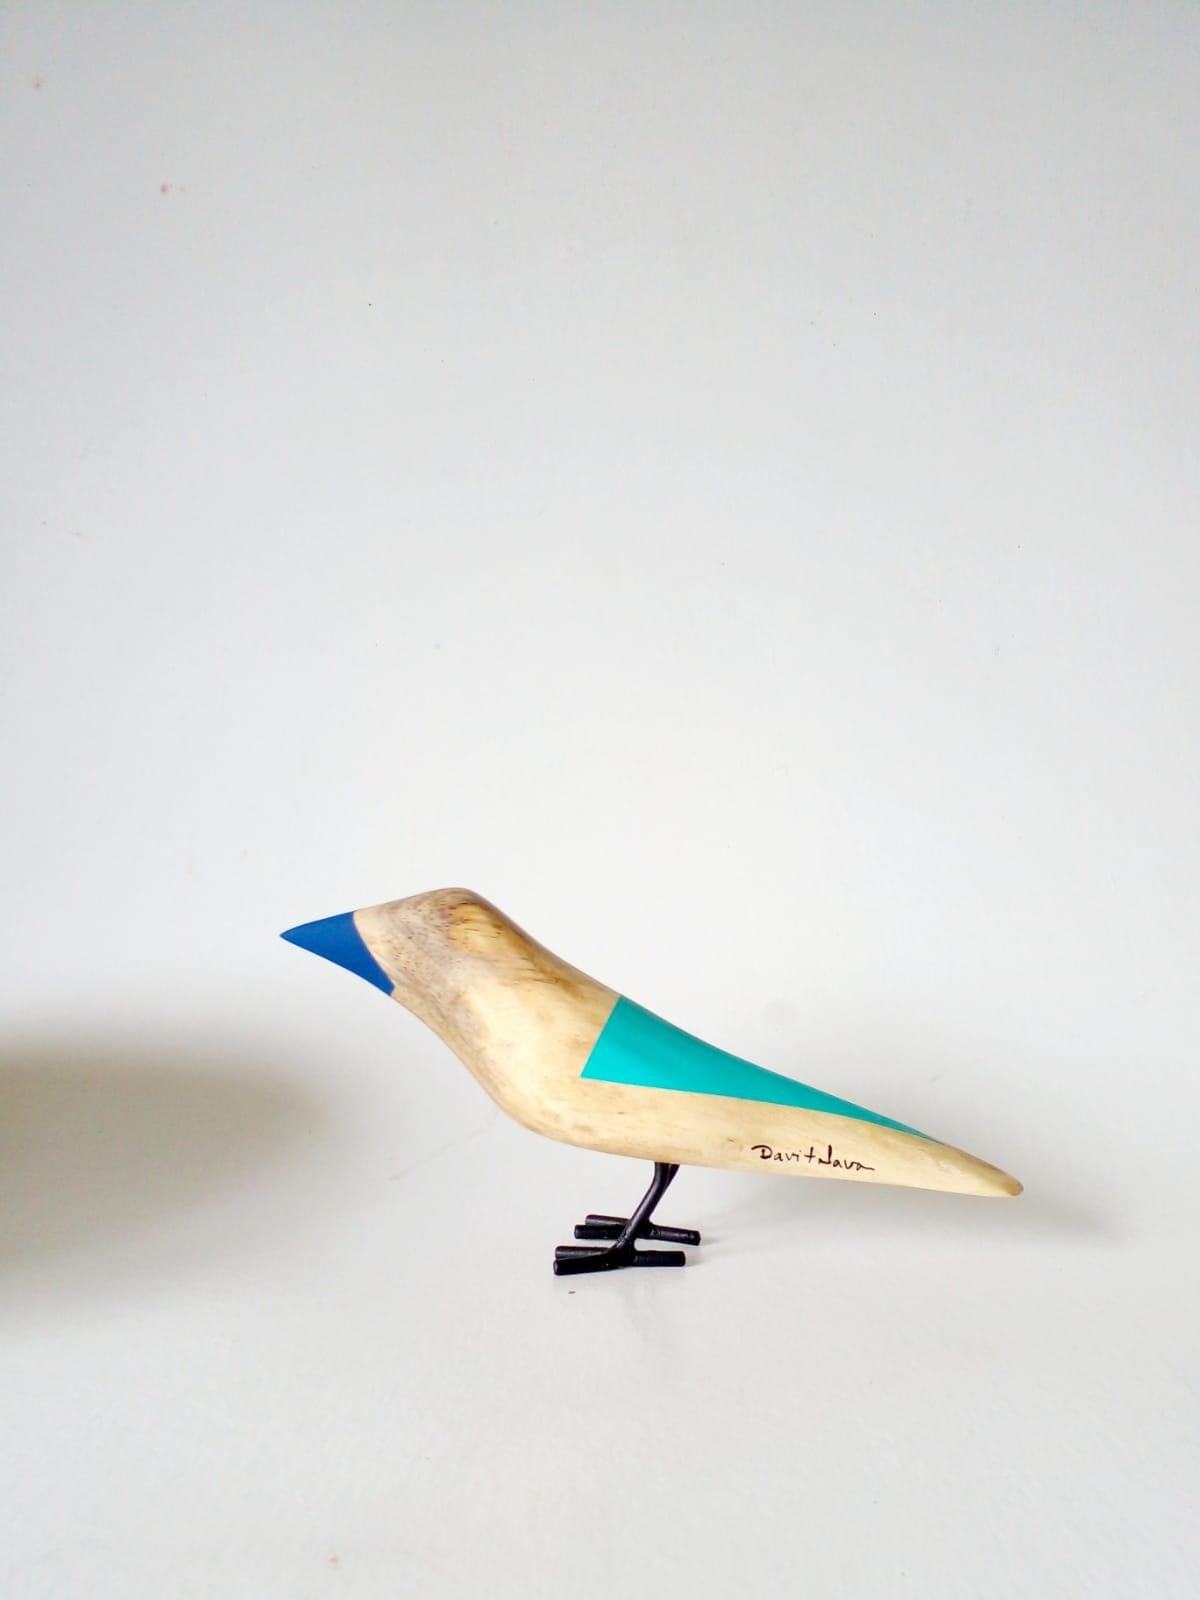 Birdies Collection, 2021
5 pieces 
Reclaimed Wood
Limited Edition
Each piece is signed by the artist

About the artist 

Davit Nava’s work focuses on showing the beauty of nature by creating sustainable art that seeks to raise public awareness on